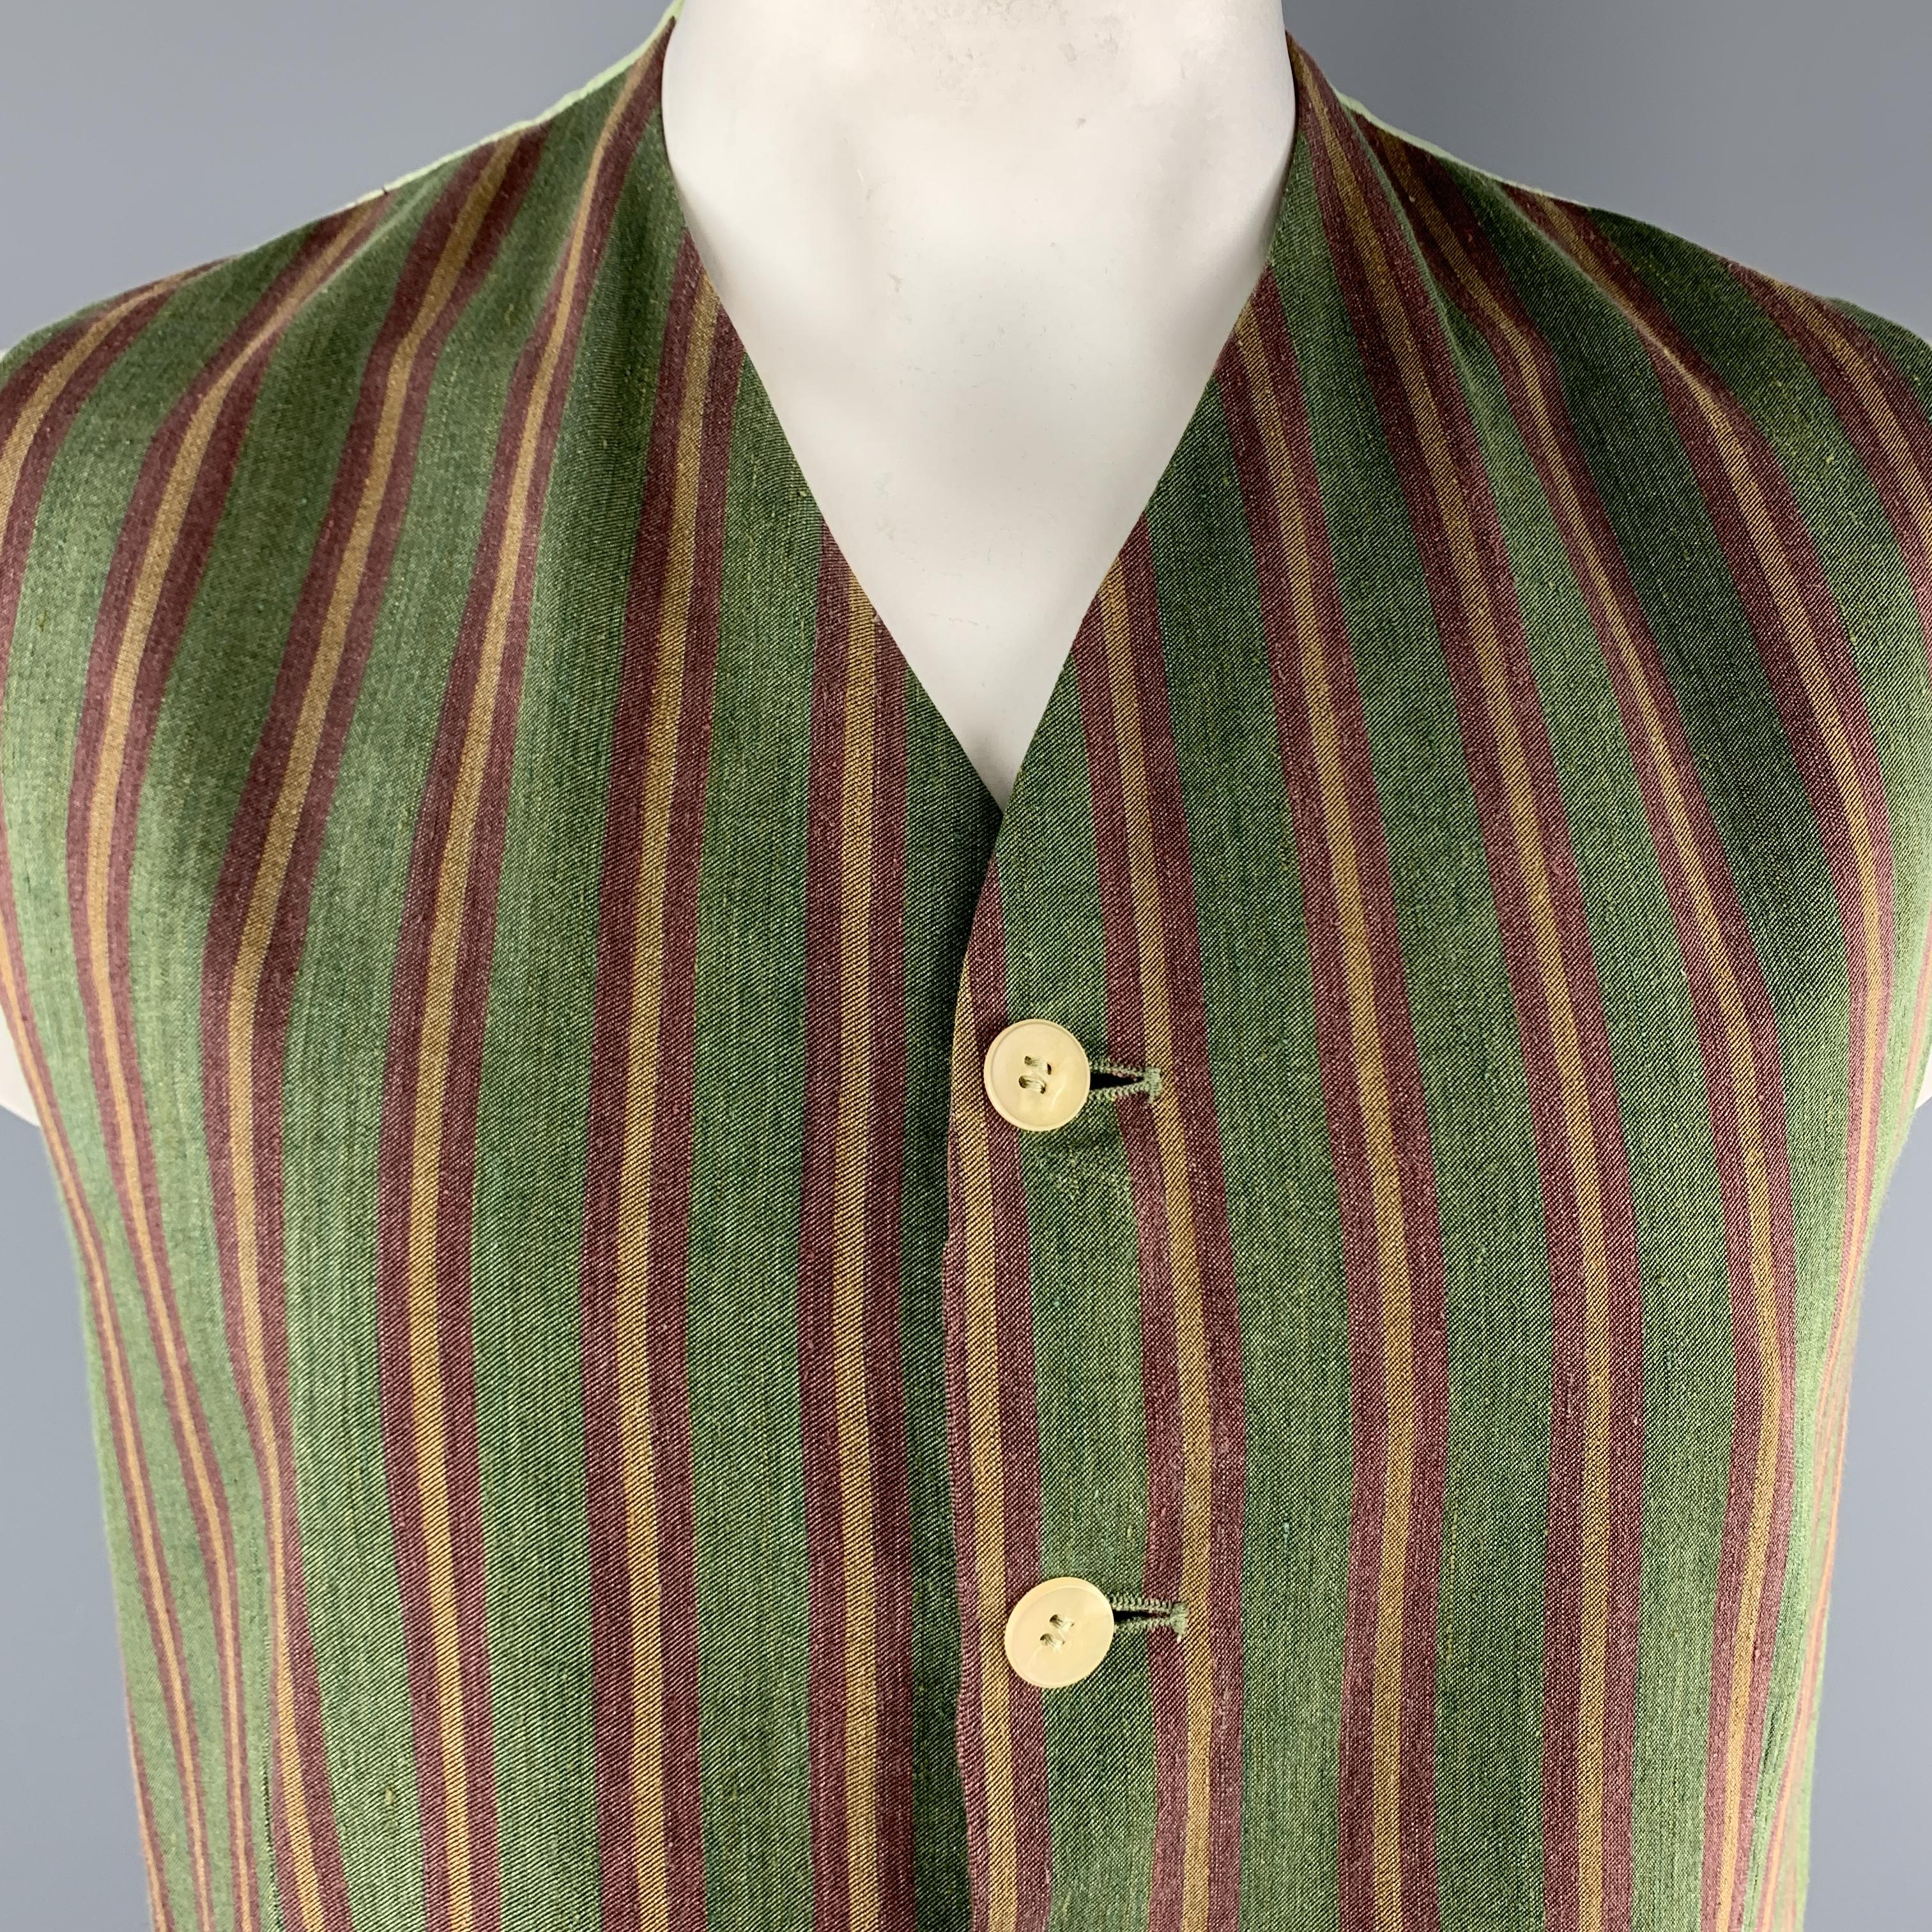 Vintage KENZO HOMME vest comes in green, burgundy and gold striped linen with a pastel lime green back. Made in France.

Excellent Pre-Owned Condition.
Marked: XXL

Measurements:

Shoulder: 14.5 in.
Chest: 46 in.
Length: 27 in.